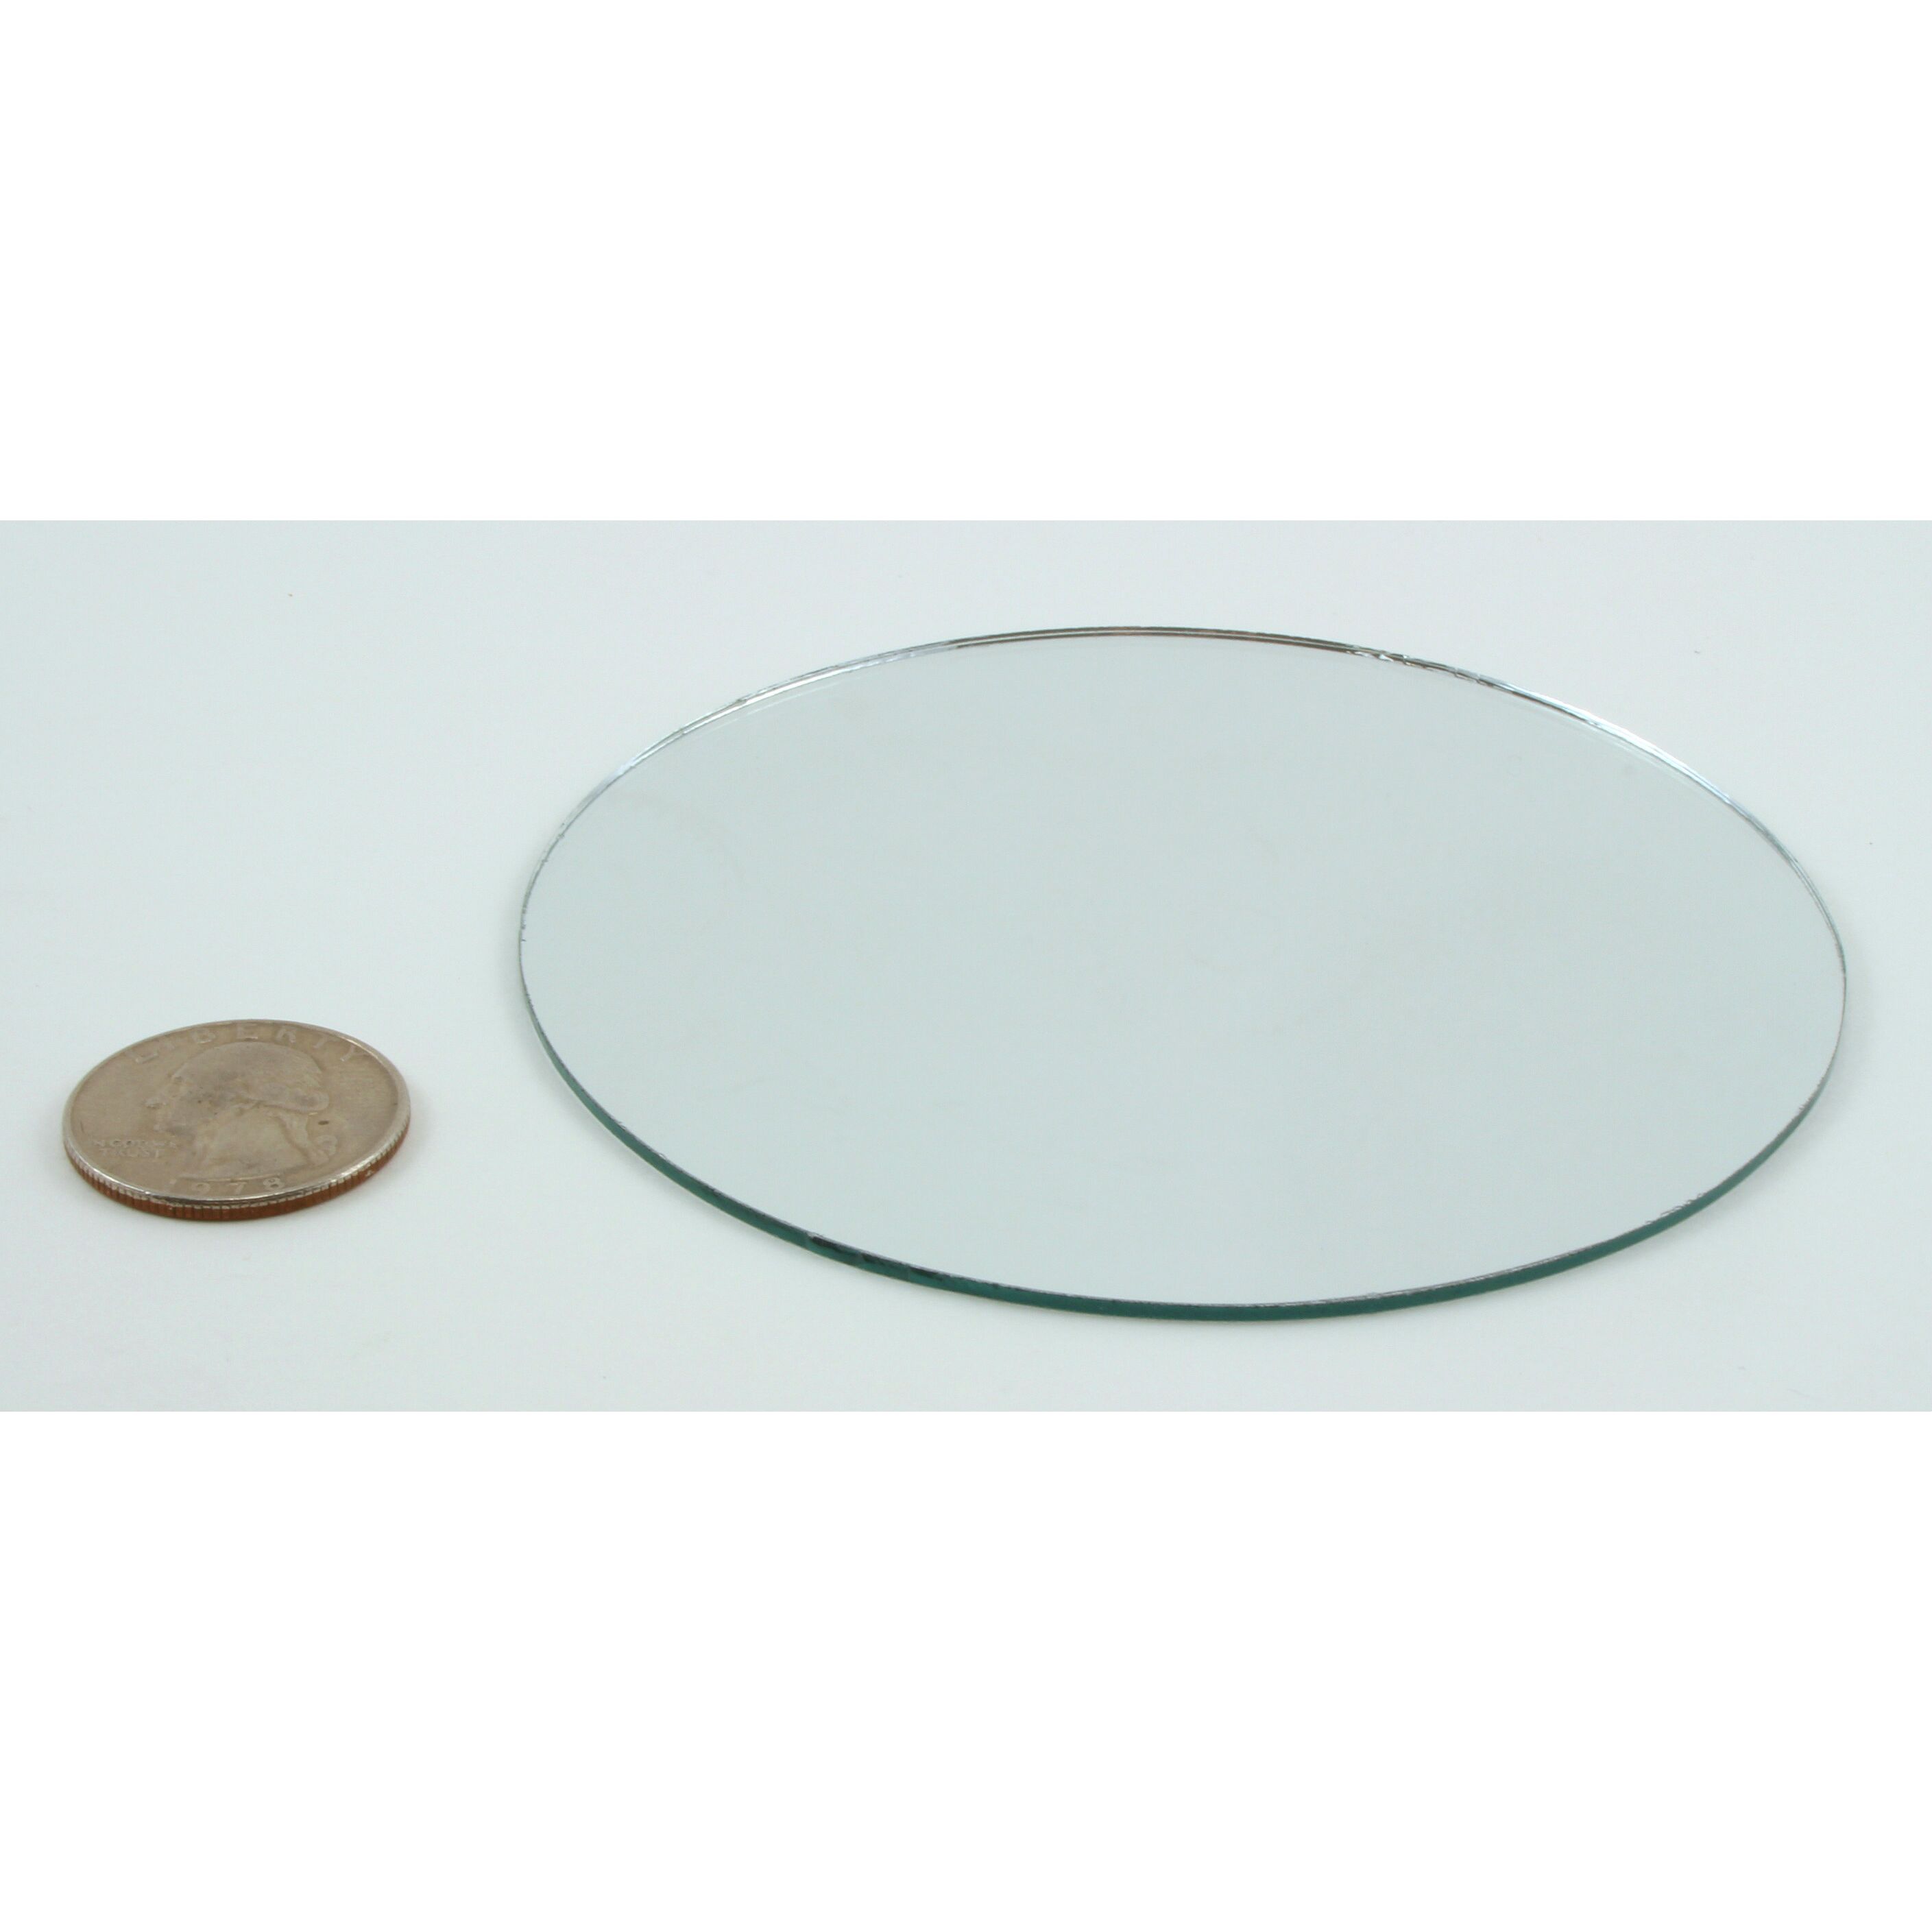 4 inch Glass Craft Small Round Mirror 24 Pieces Mosaic Mirror Tiles